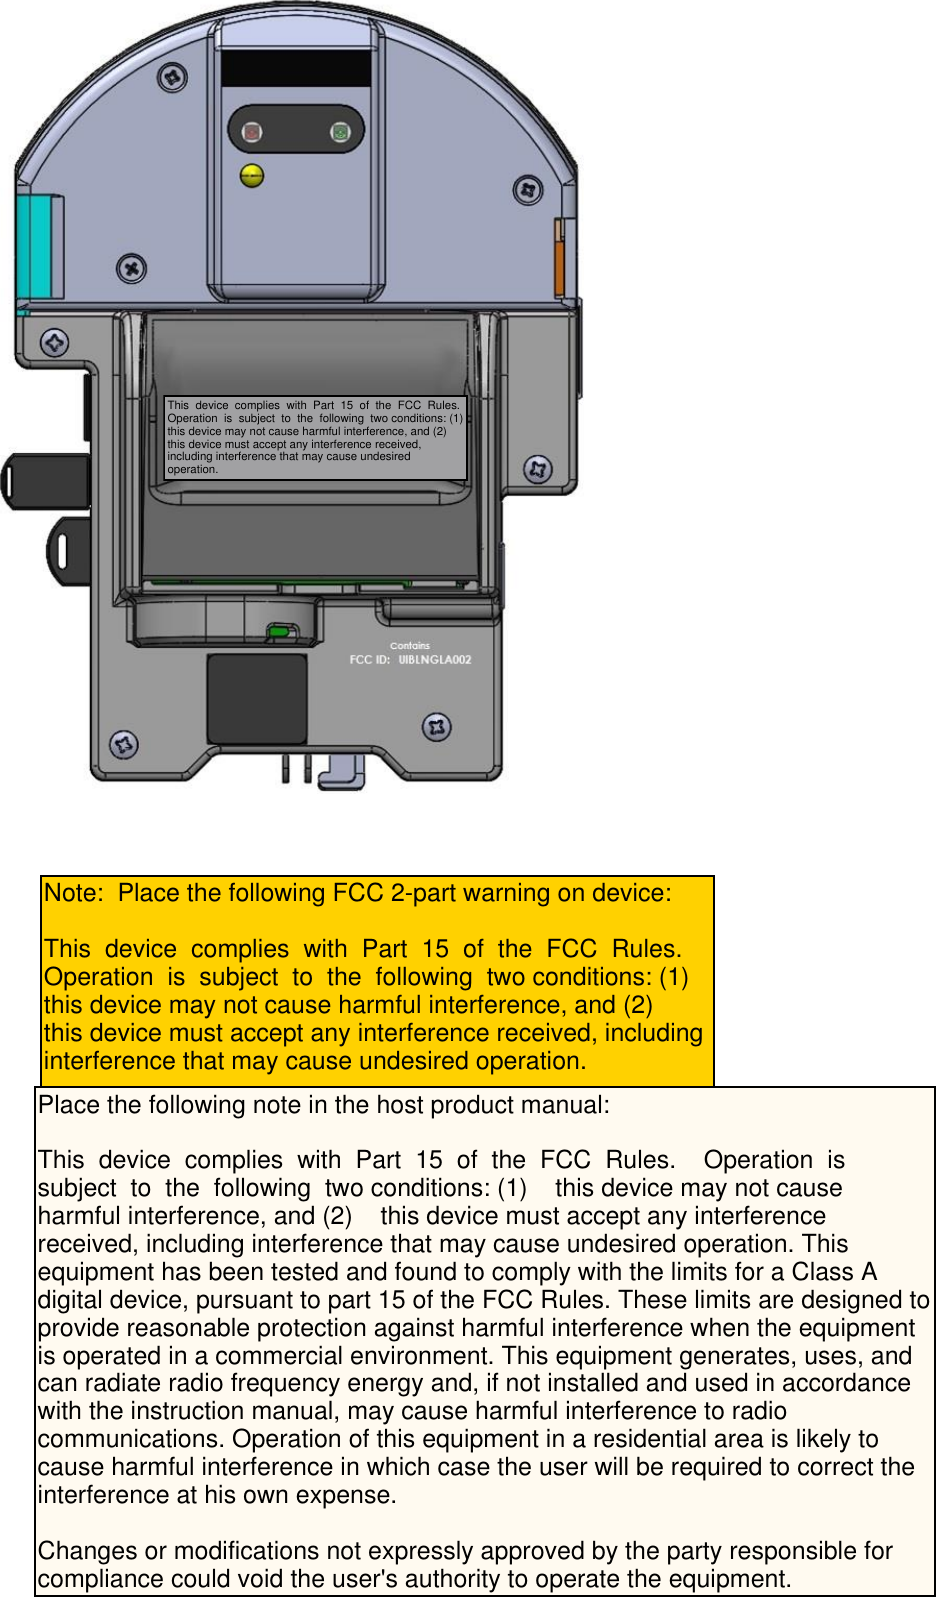  Note:  Place the following FCC 2-part warning on device: This  device  complies  with  Part  15  of  the  FCC  Rules.    Operation  is  subject  to  the  following  two conditions: (1)this device may not cause harmful interference, and (2)    this device must accept any interference received, including interference that may cause undesired operation. This  device  complies  with  Part  15  of  the  FCC  Rules.Operation  is  subject  to  the  following  two conditions: (1)this device may not cause harmful interference, and (2)    this device must accept any interference received, including interference that may cause undesired operation. Place the following note in the host product manual: This  device  complies  with  Part  15  of  the  FCC  Rules.    Operation  is  subject  to  the  following  two conditions: (1)    this device may not cause harmful interference, and (2)    this device must accept any interference received, including interference that may cause undesired operation. This equipment has been tested and found to comply with the limits for a Class A digital device, pursuant to part 15 of the FCC Rules. These limits are designed toprovide reasonable protection against harmful interference when the equipment is operated in a commercial environment. This equipment generates, uses, and can radiate radio frequency energy and, if not installed and used in accordance with the instruction manual, may cause harmful interference to radio communications. Operation of this equipment in a residential area is likely to cause harmful interference in which case the user will be required to correct the interference at his own expense.Changes or modifications not expressly approved by the party responsible for compliance could void the user&apos;s authority to operate the equipment.